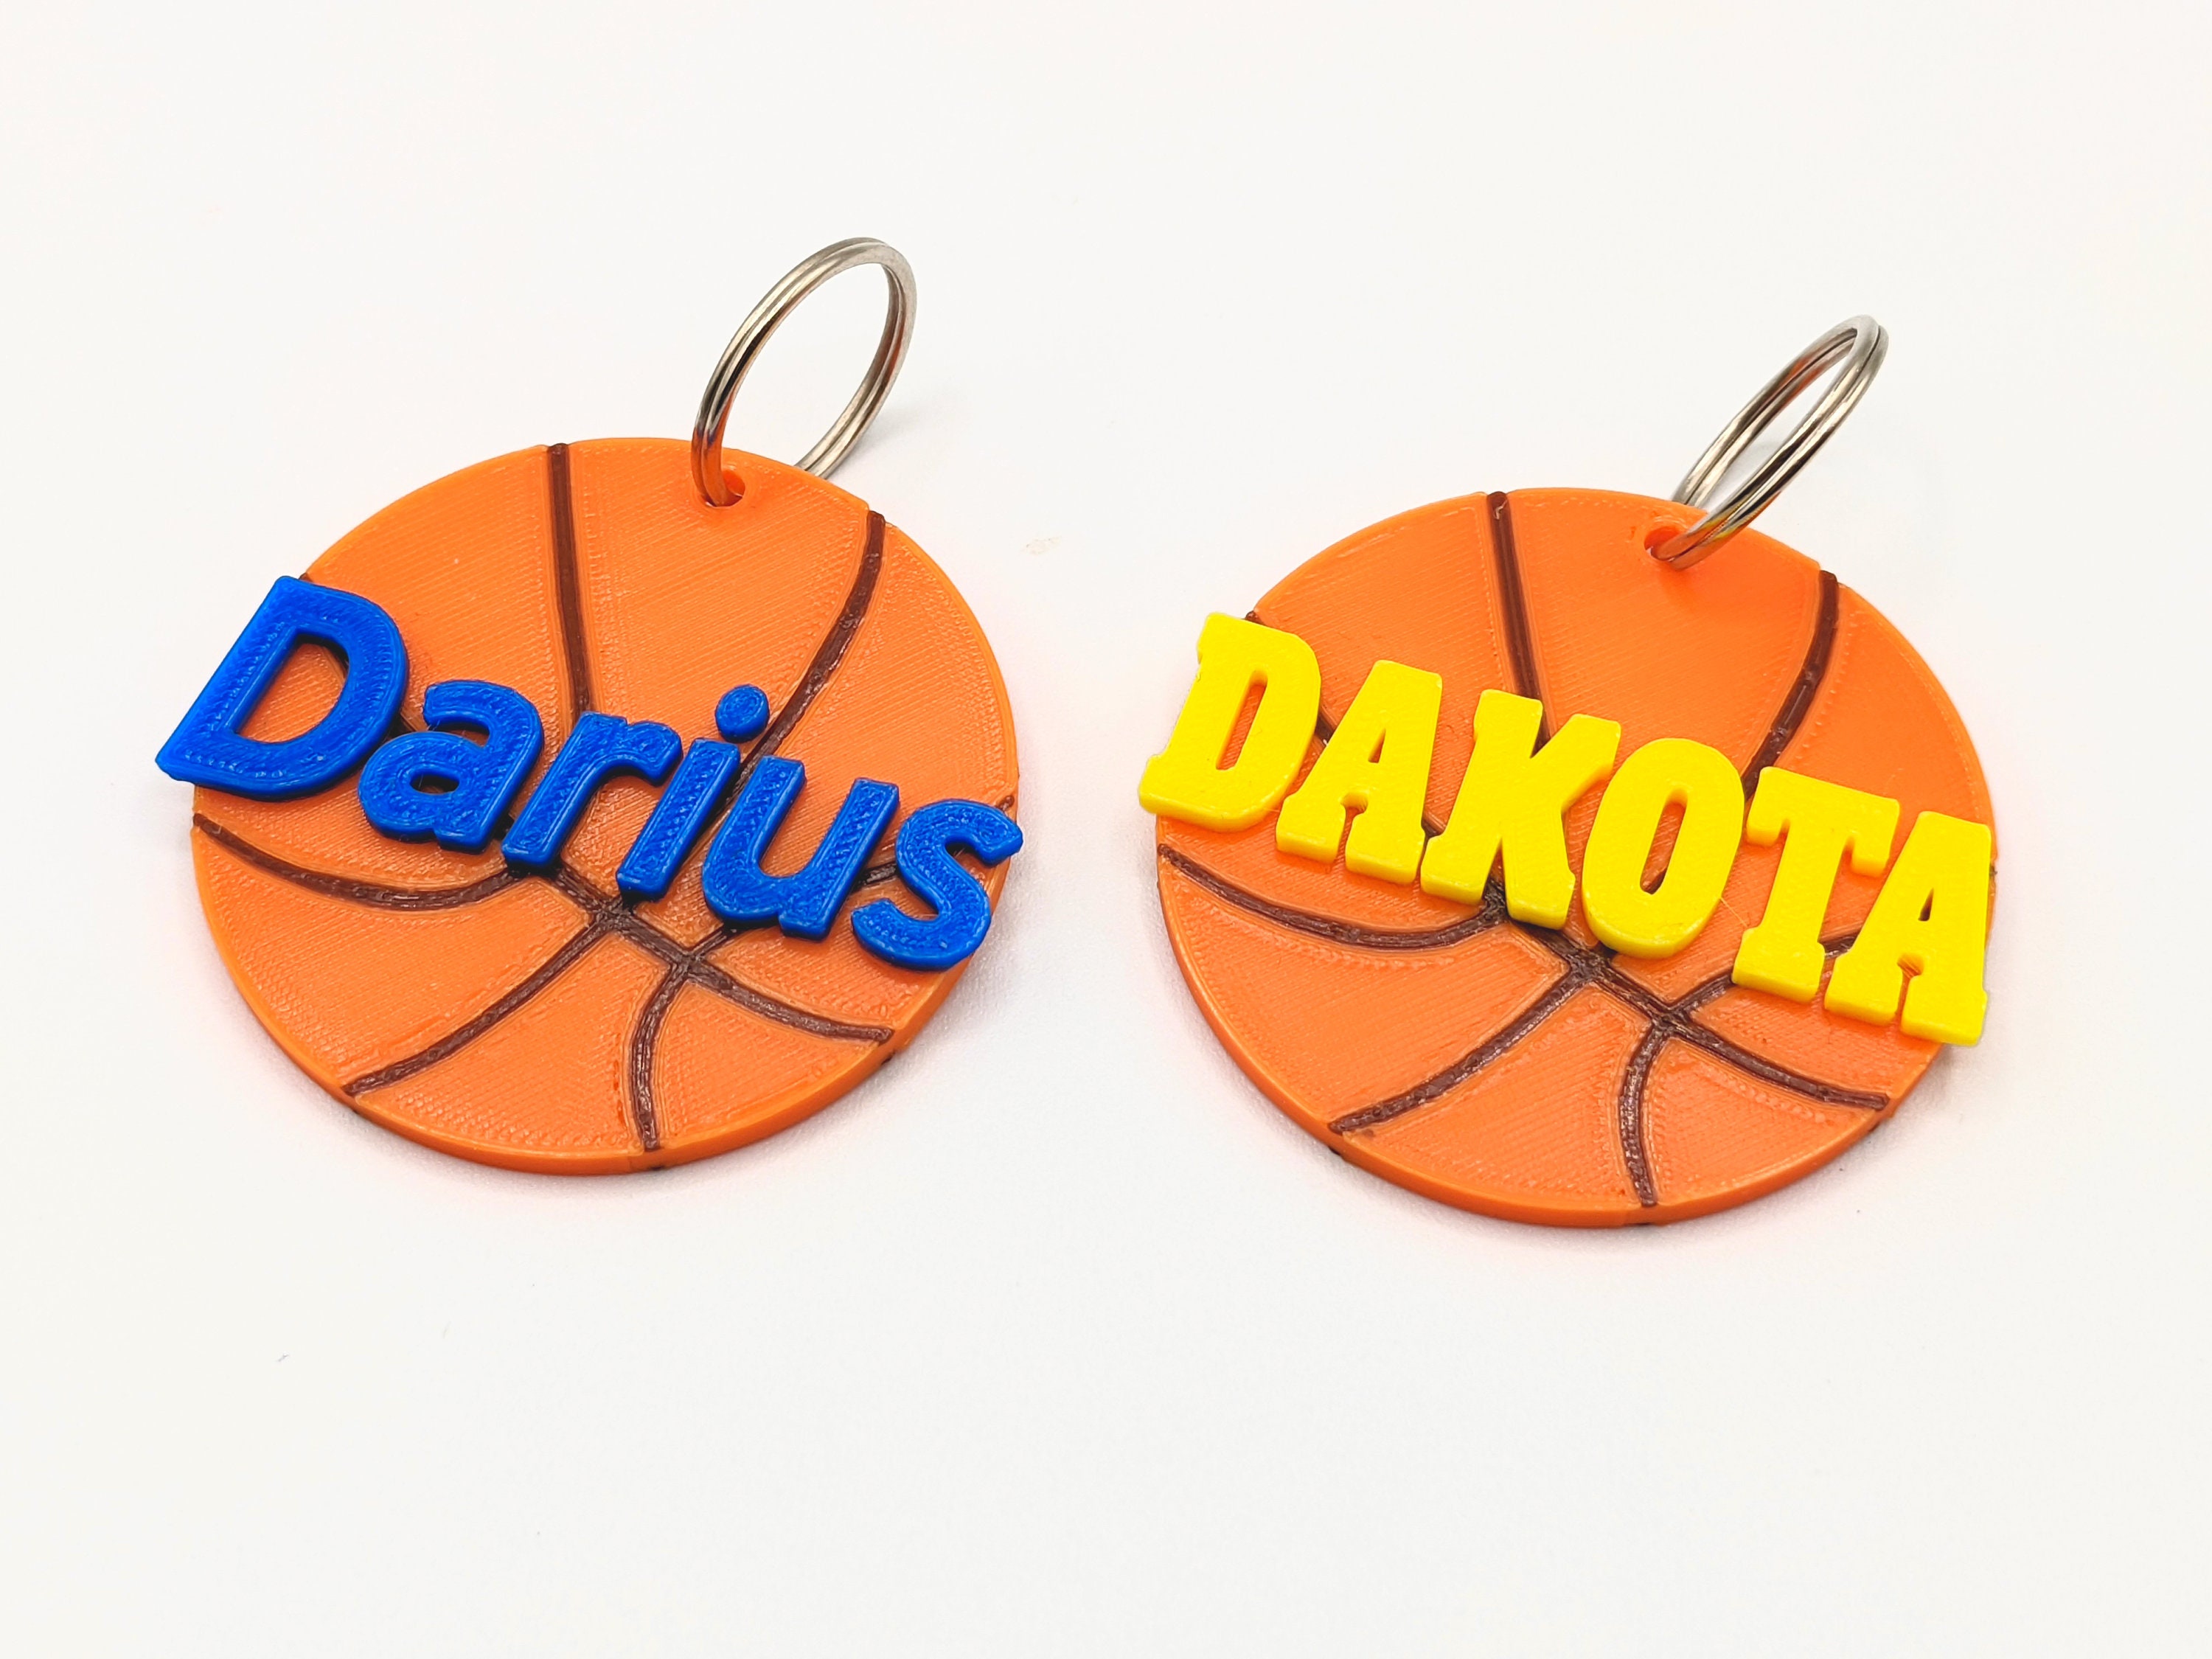 Hexagizmo 3D Personalized Basketball Keychain - 3D Print Made to Order: Choose Your Color and Font - 2 Bag Tag (Includes Keyring) - Basketball Gift